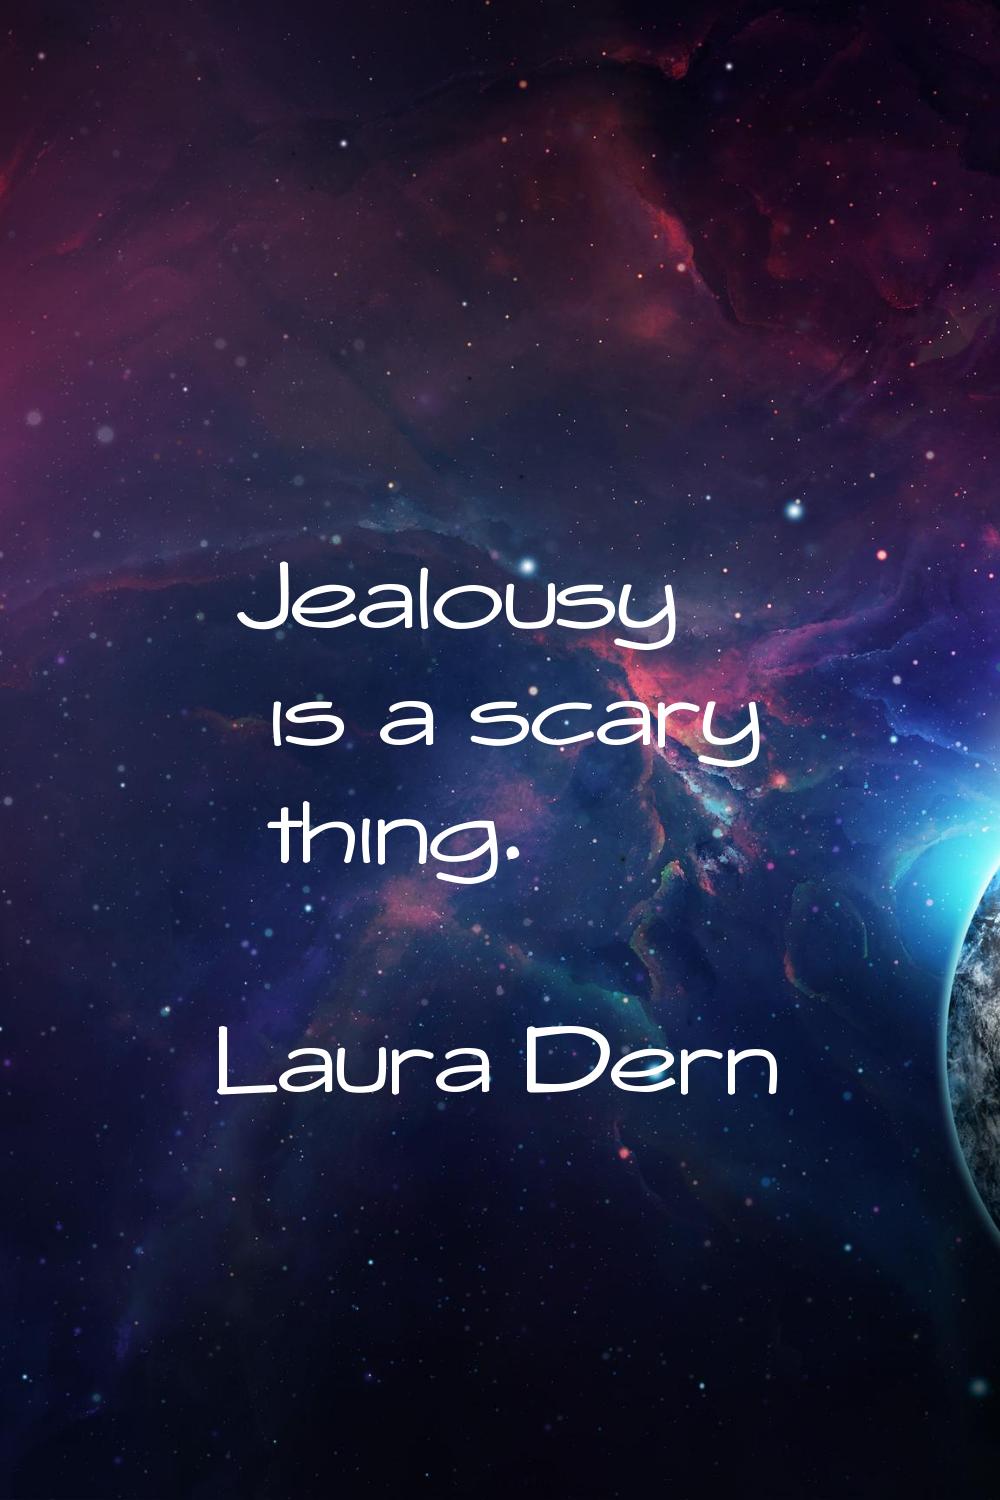 Jealousy is a scary thing.